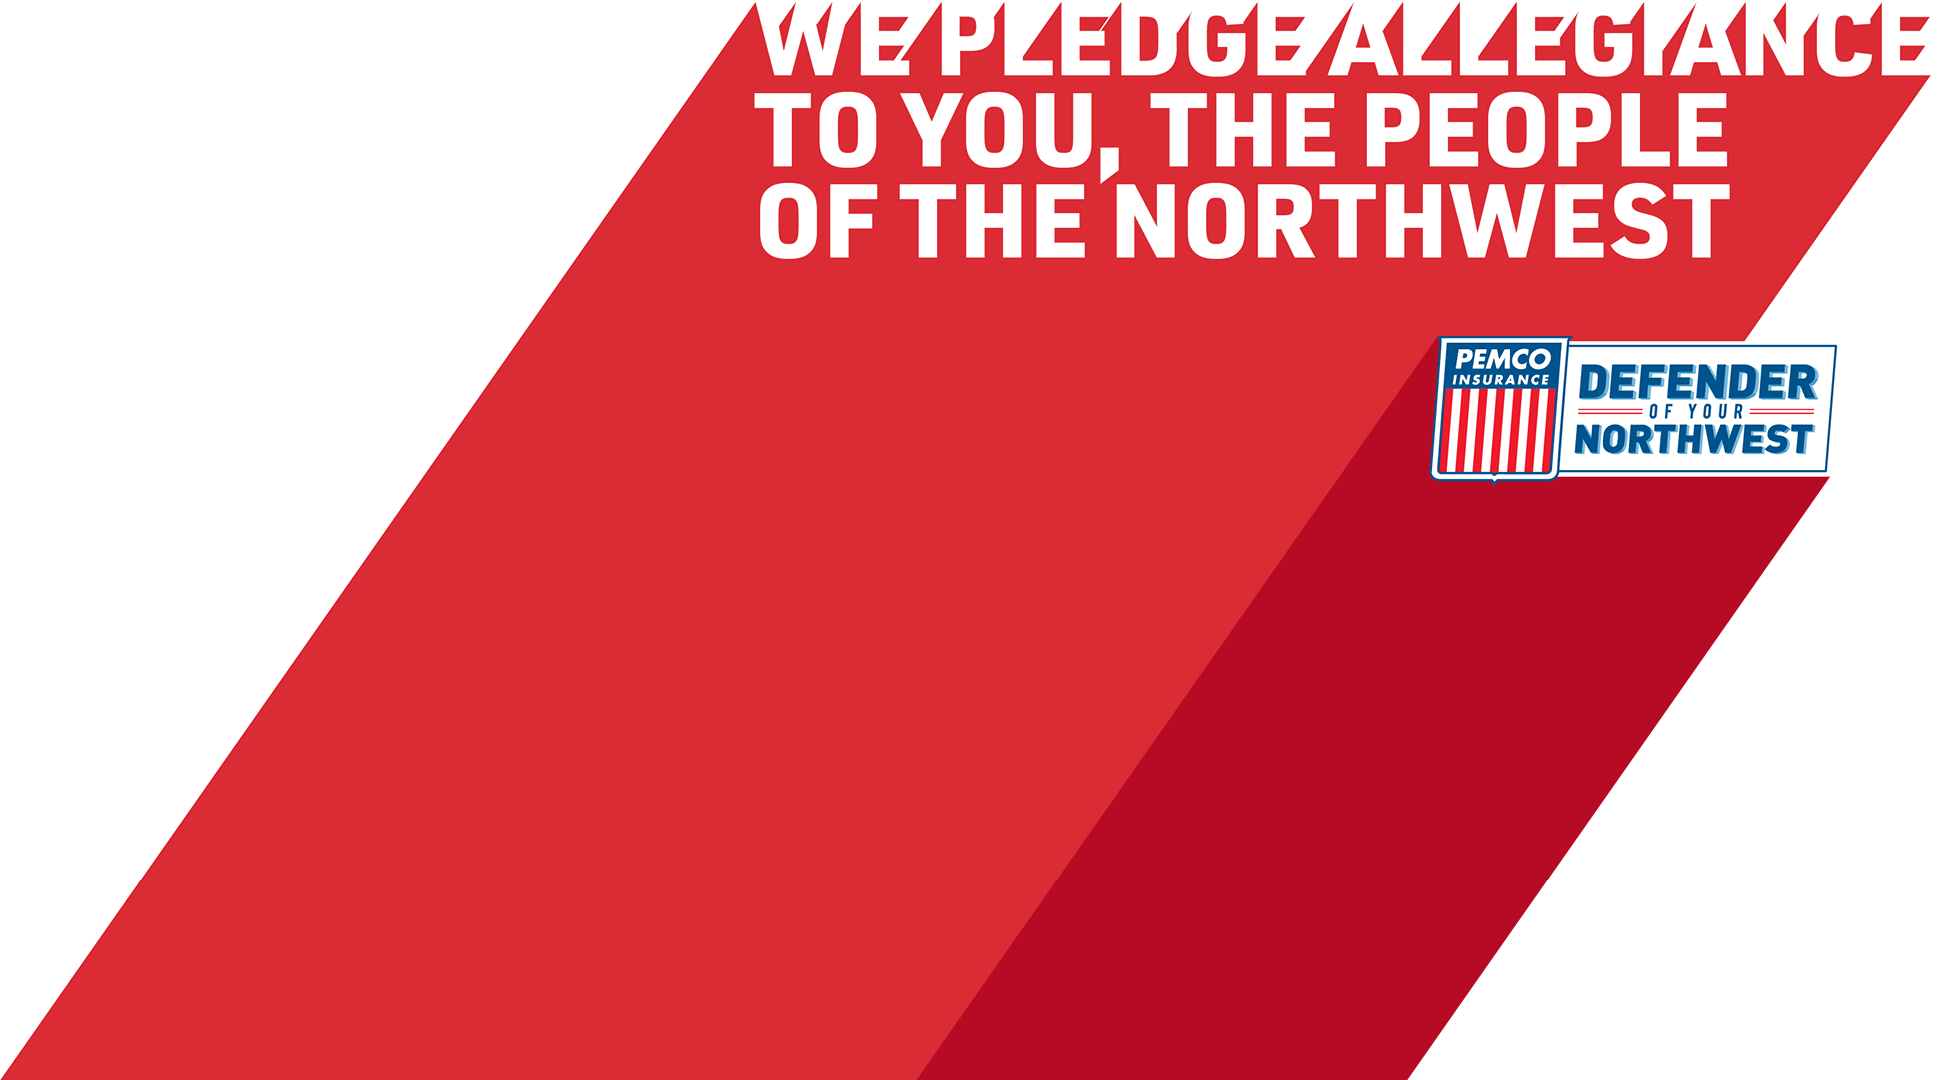 We pledge allegiance to you, the people of the Northwest.